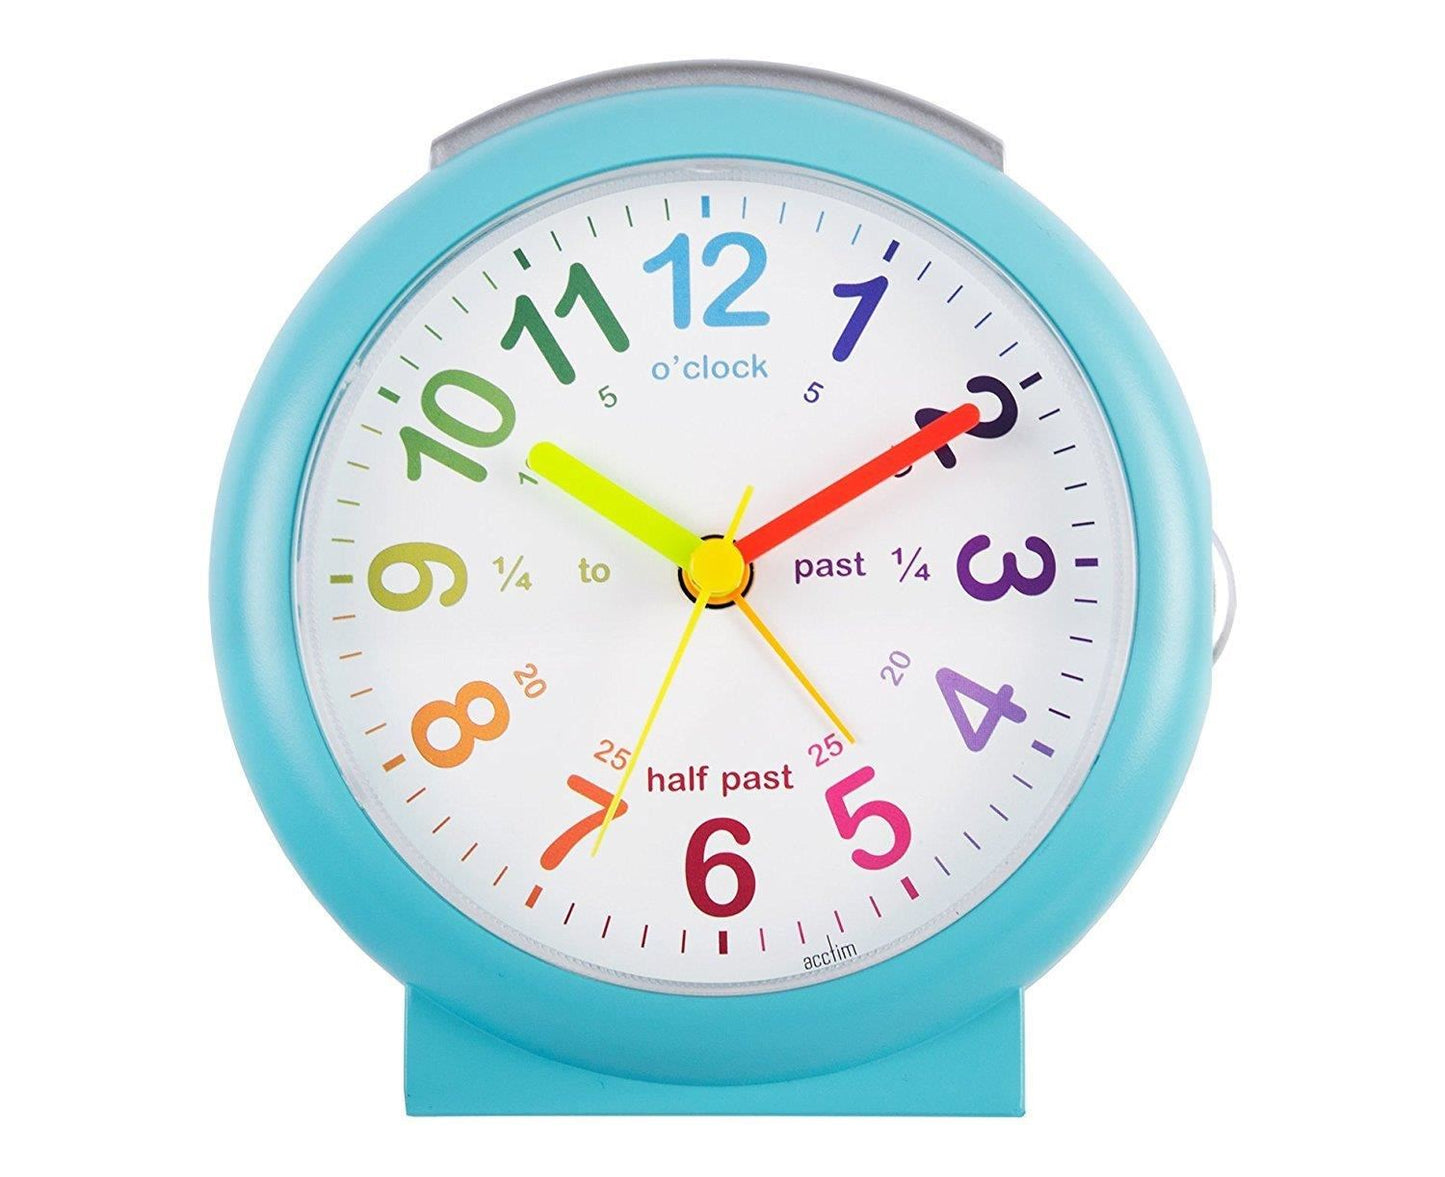 Acctim LULU 2 Childrens Time Teaching Bold Sweep Seconds Alarm Clock 1521 Available Multiple Colour